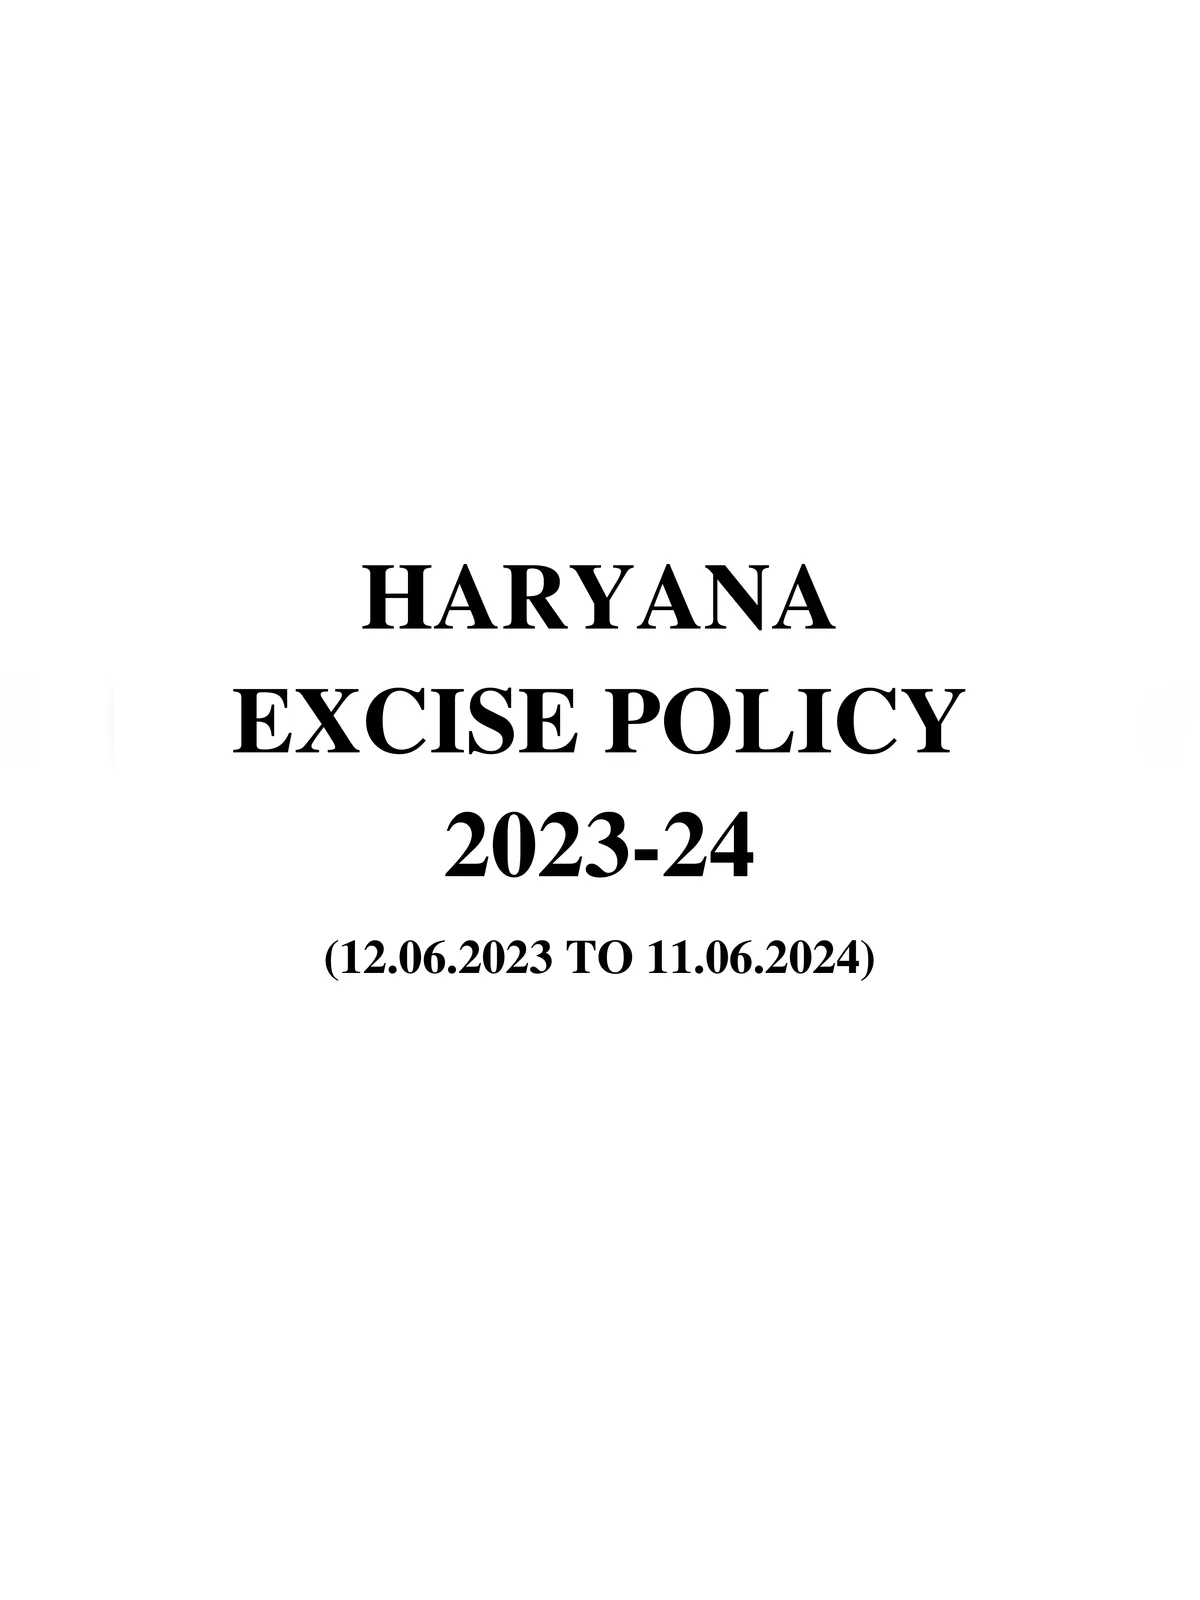 Haryana Excise Policy 2023-24